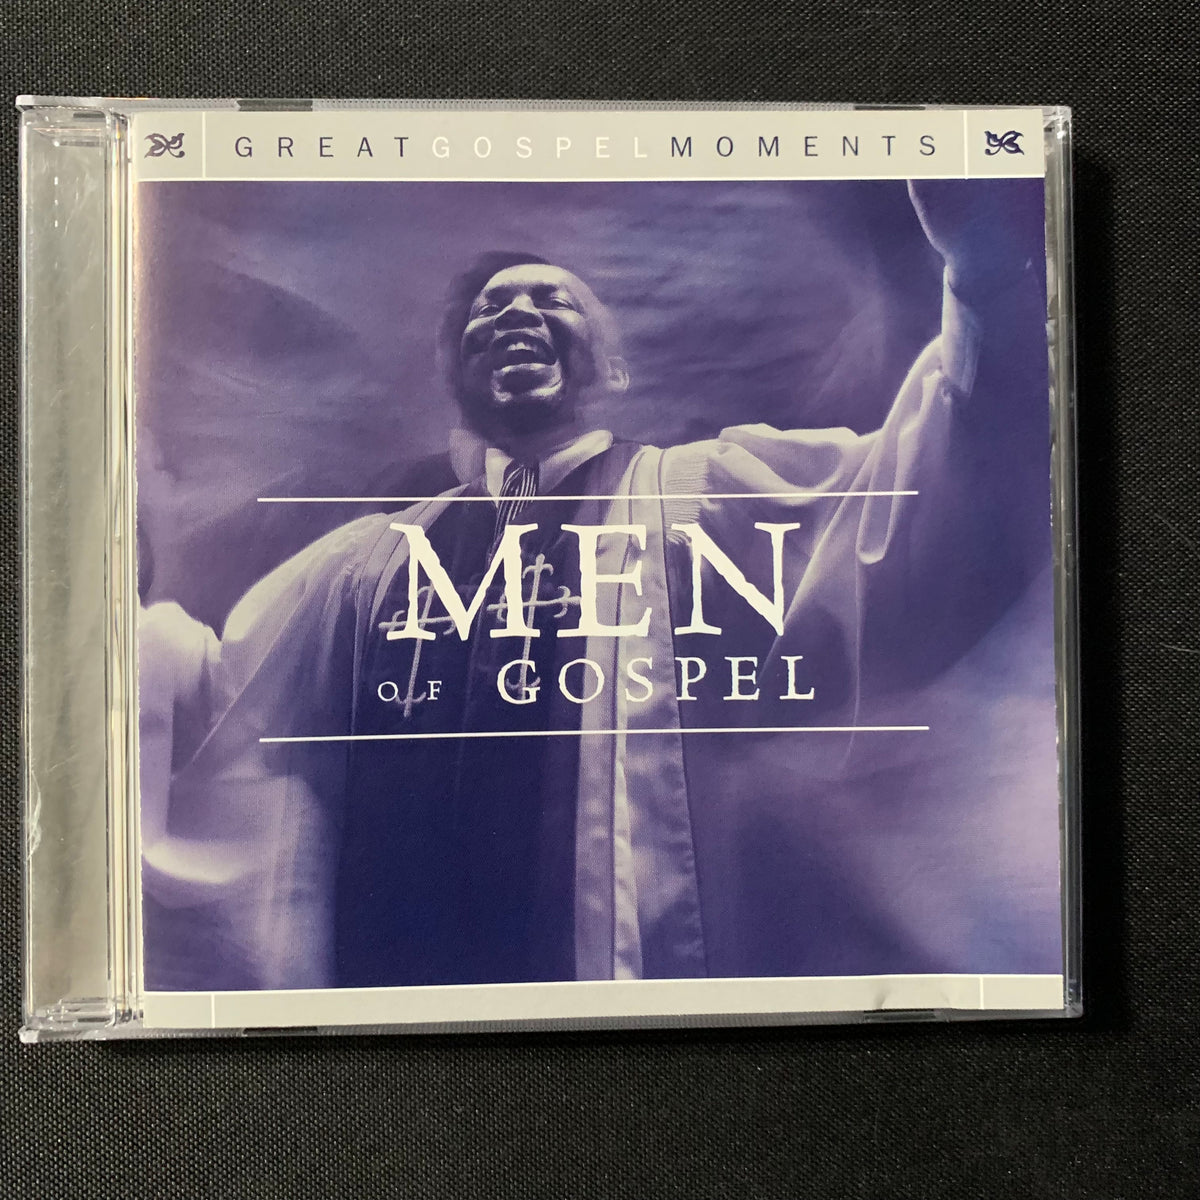 and　CD　Men　Gospel　The　Great　Al　Trading　Gospel　Moments:　Exile　of　Media　Green/Williams　Brothers/Marv　–　Co.